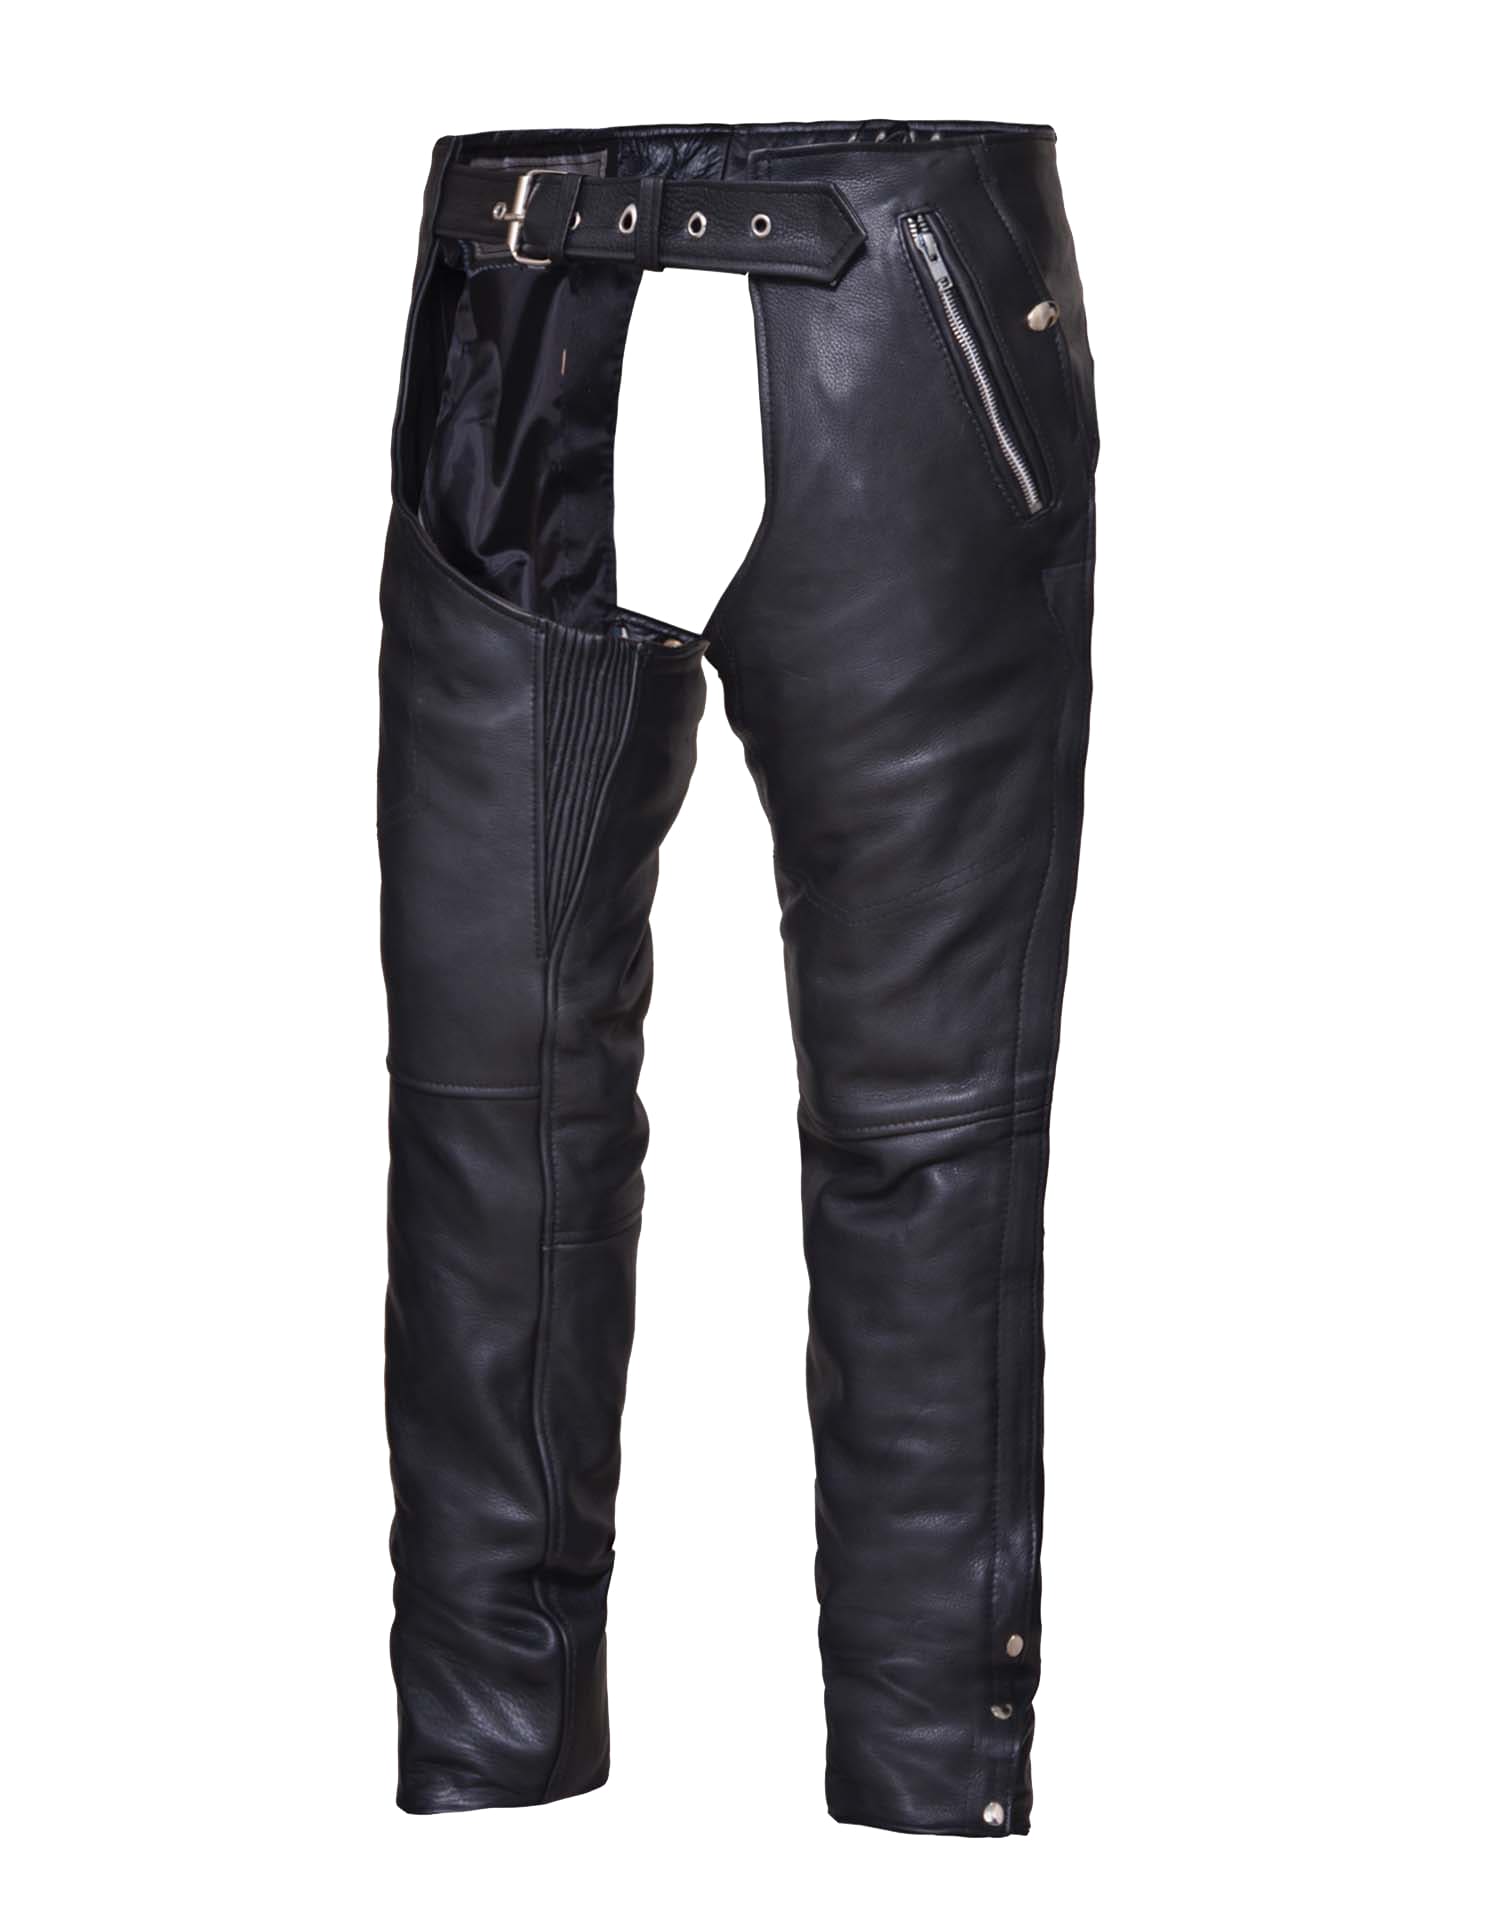 Unisex 4-Pocket Motorcycle Chaps with Snap out lliner